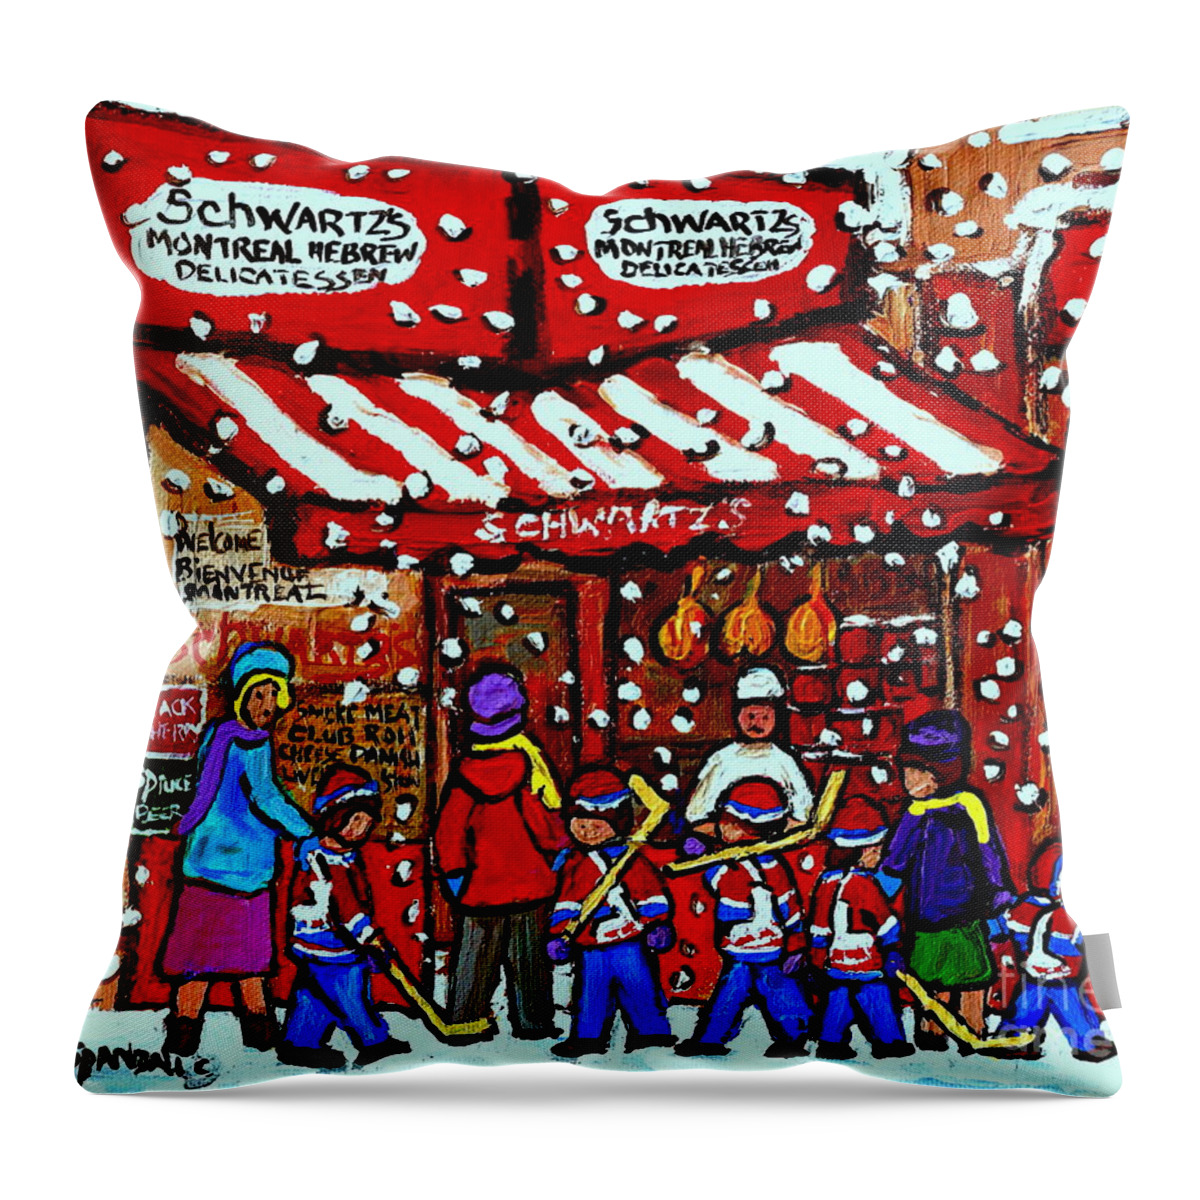 Montreal Throw Pillow featuring the painting Snowy Day Montreal Paintings Schwarts Deli Smoked Meat After The Hockey Game Carole Spandau Art by Carole Spandau